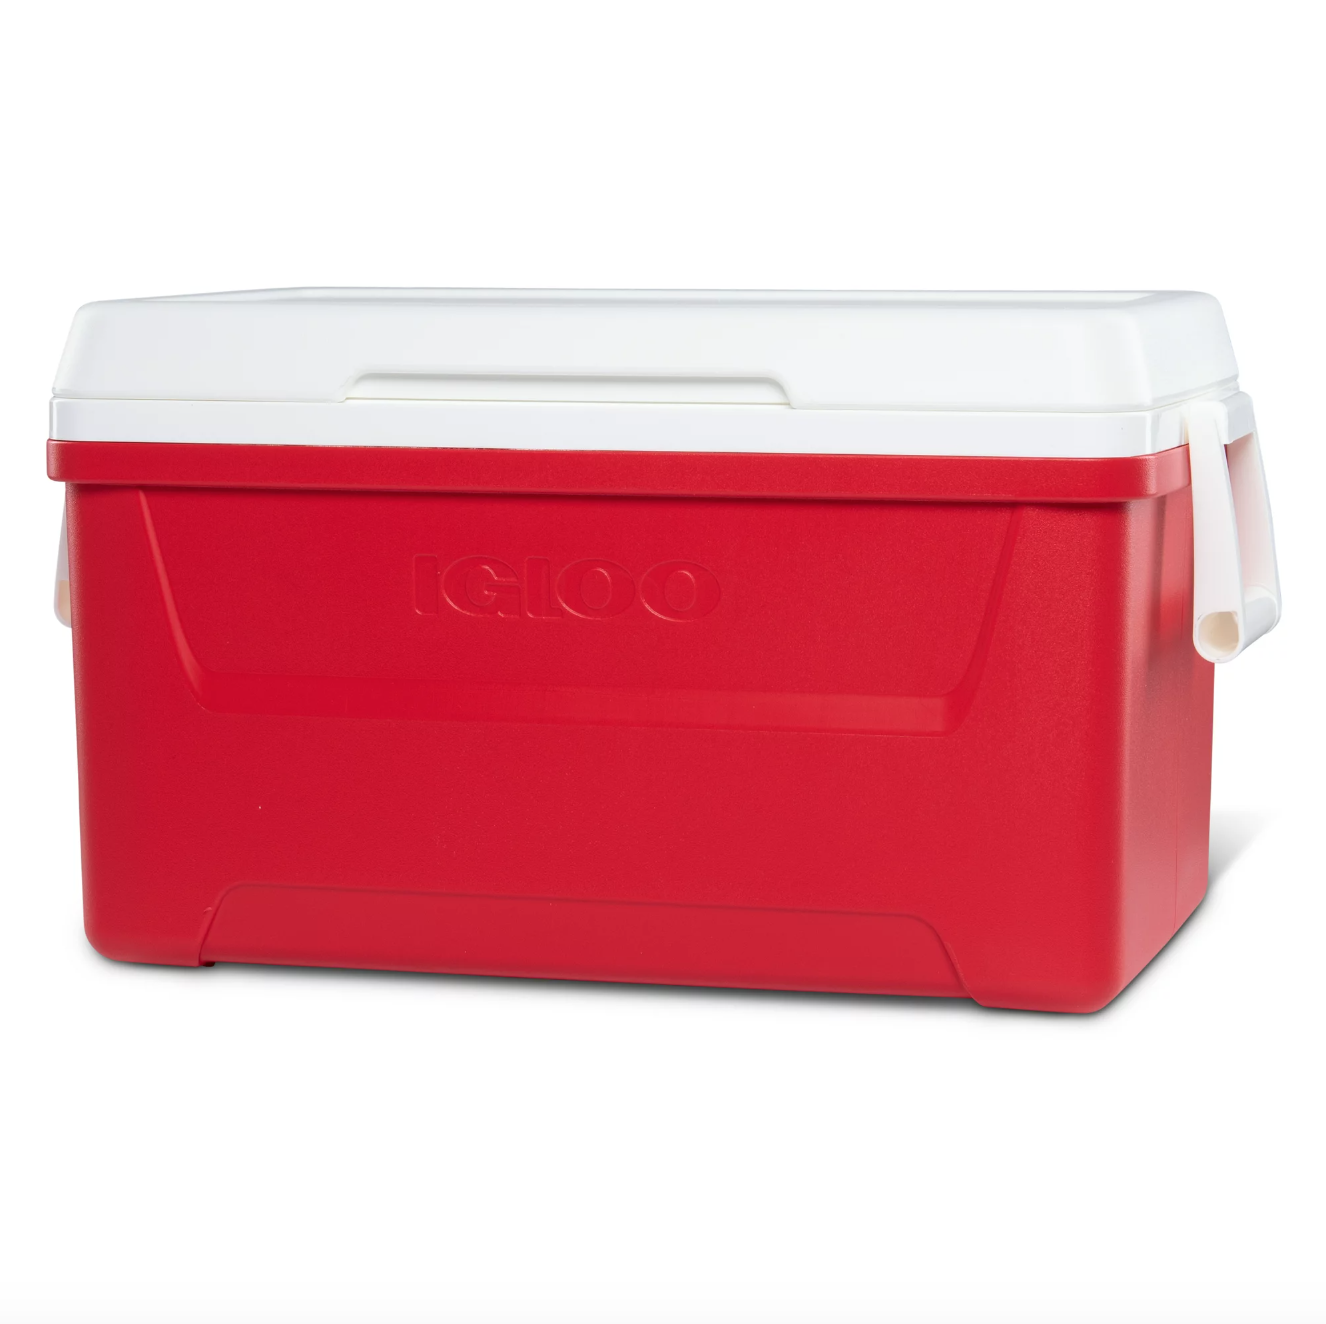 red ice chest cooler